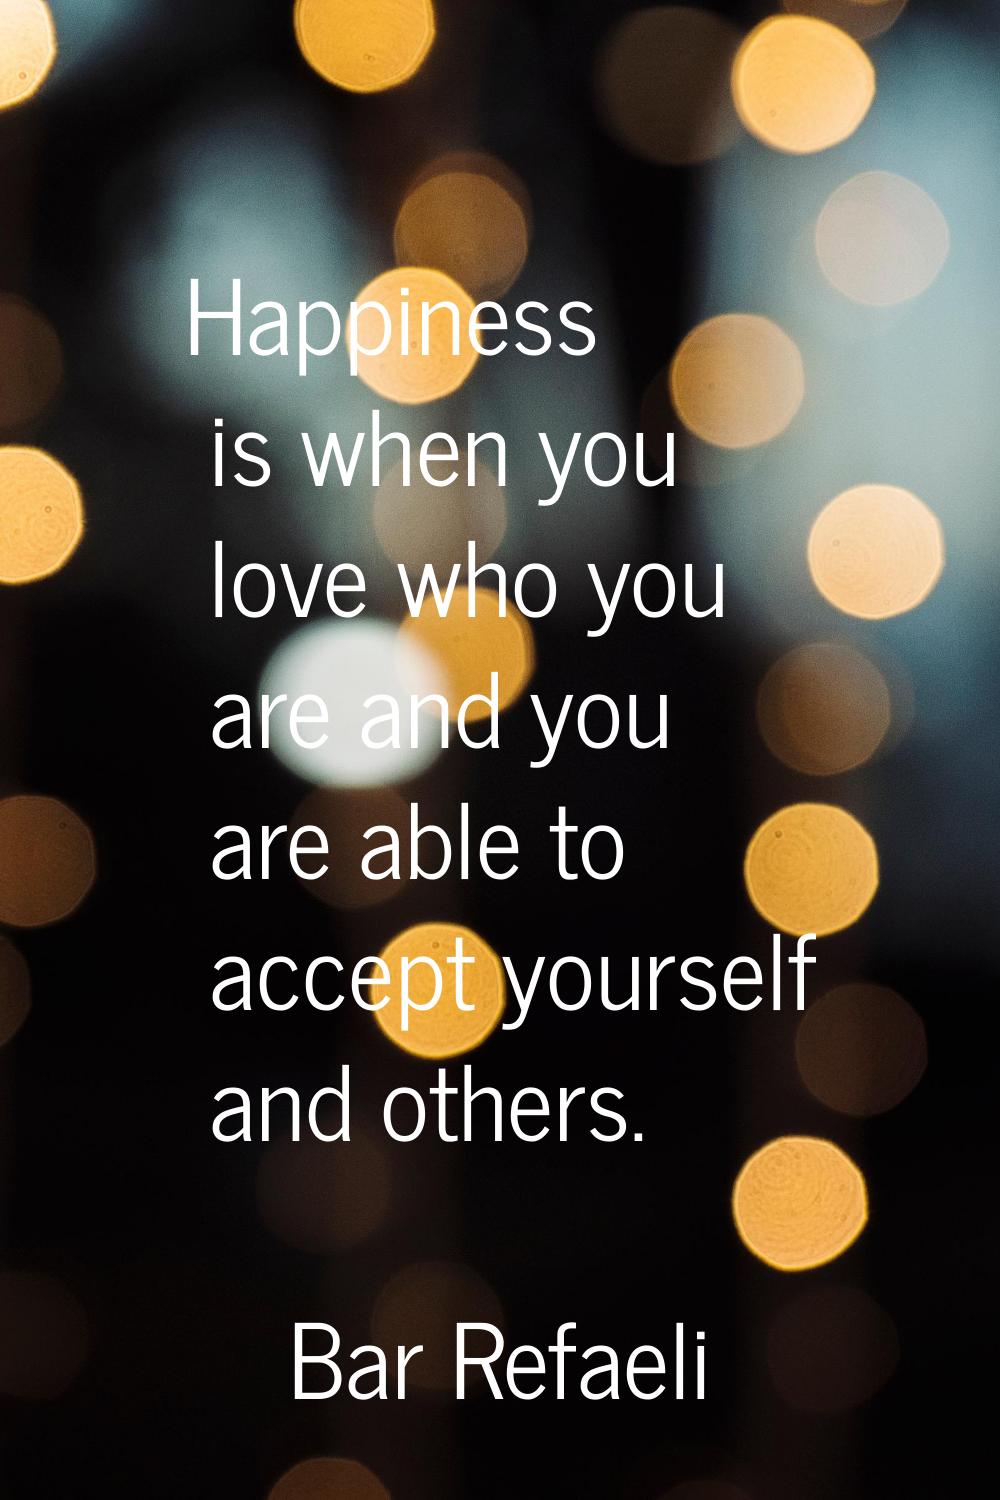 Happiness is when you love who you are and you are able to accept yourself and others.